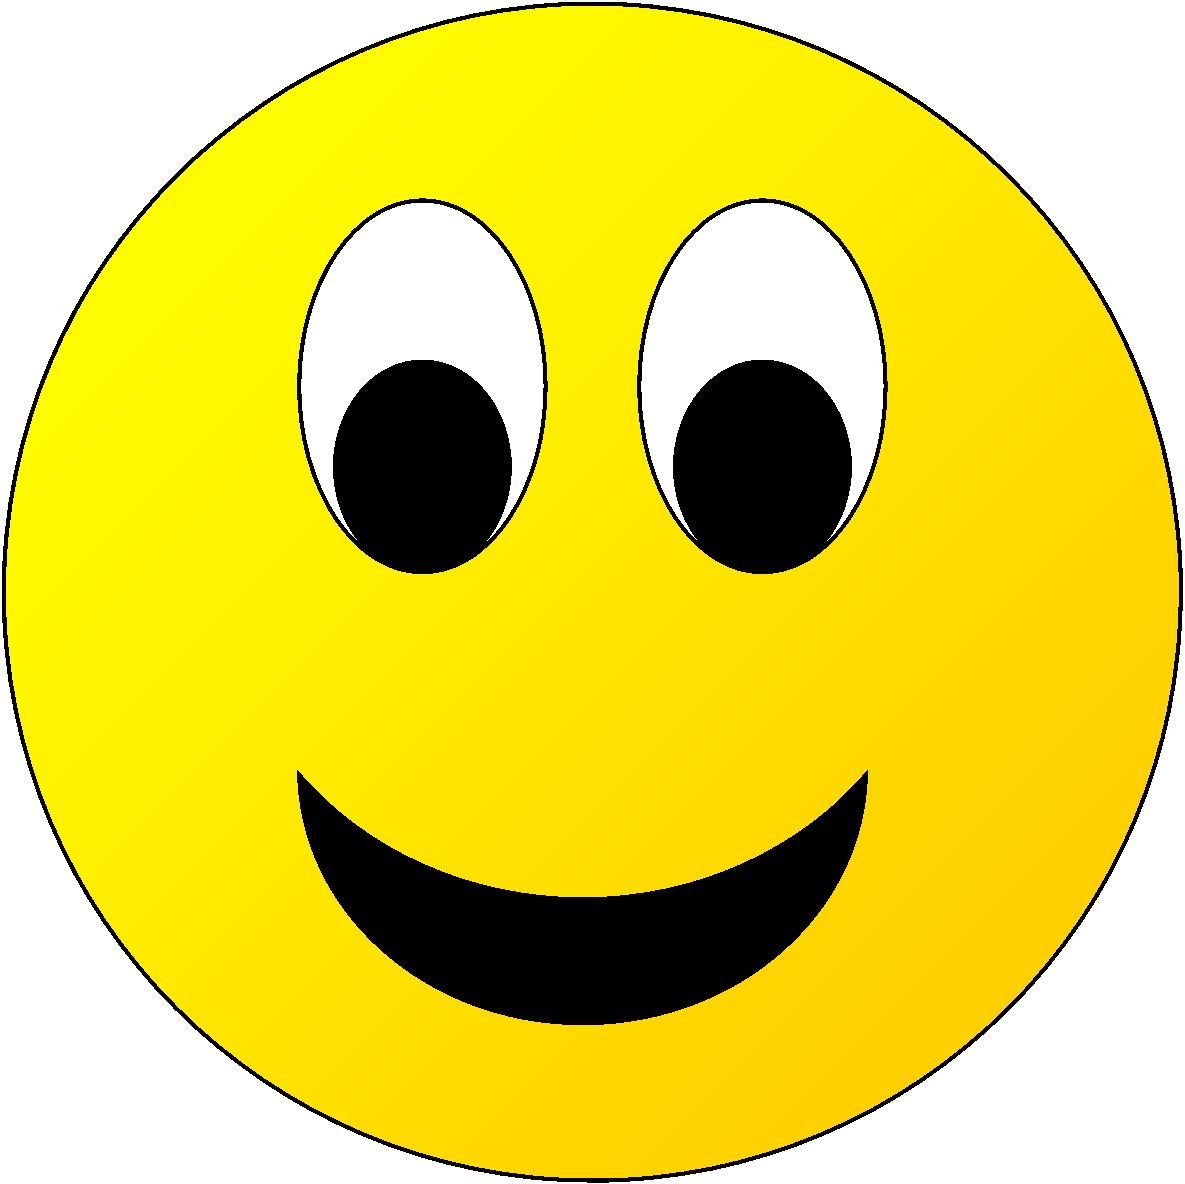 Smiley Face Images Collection (50+)